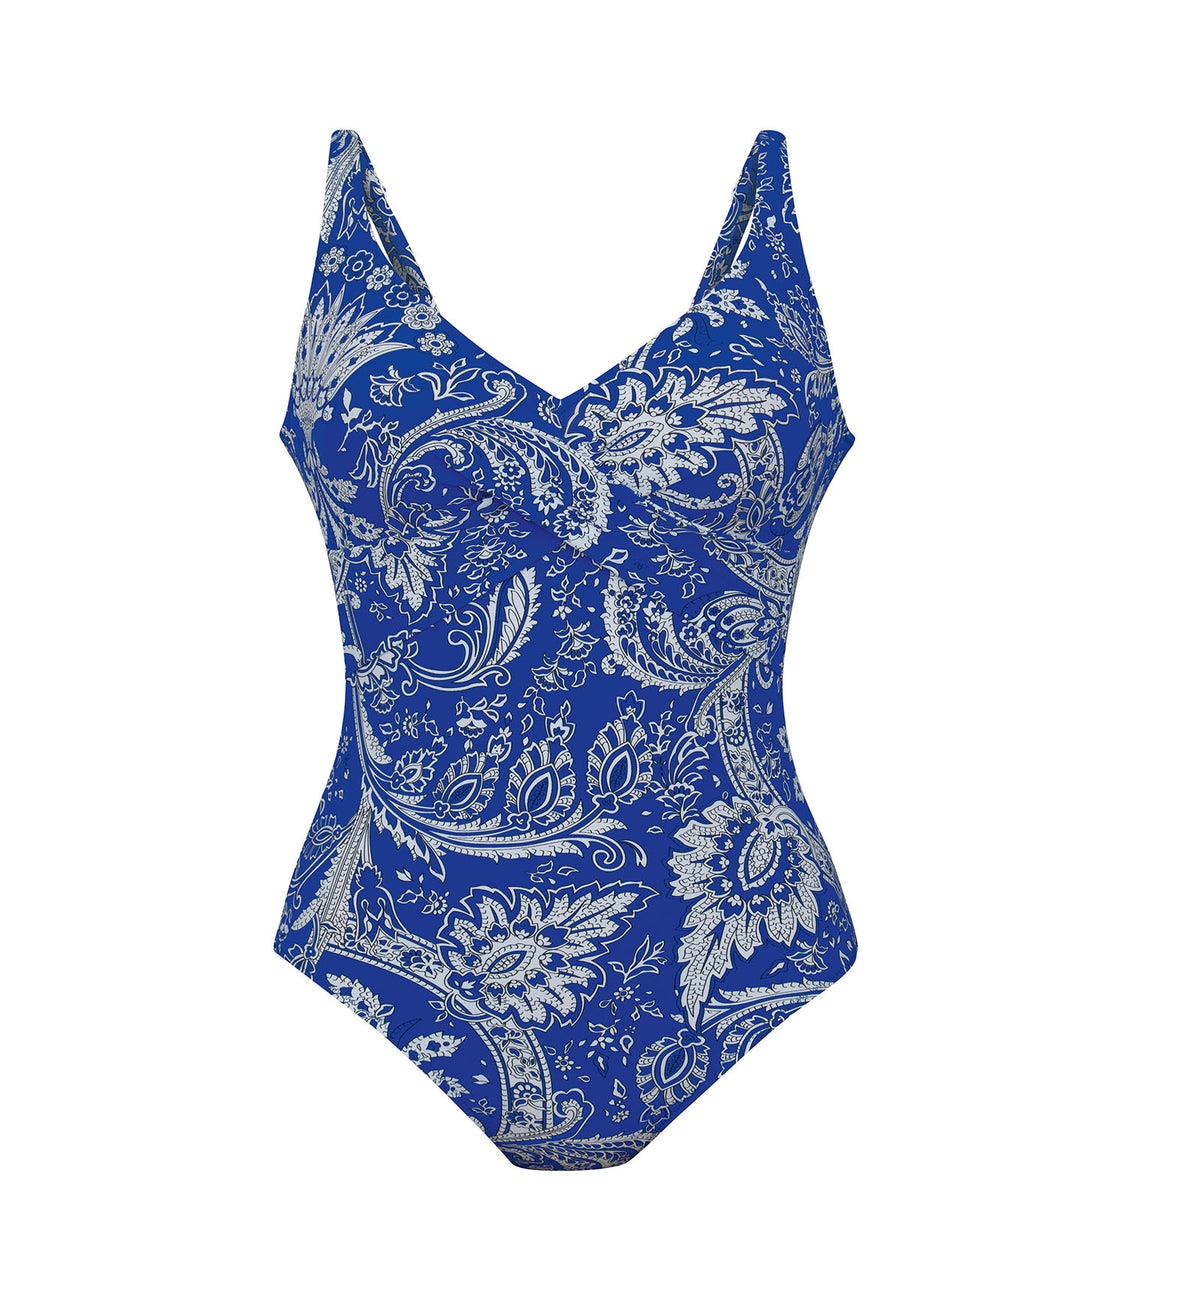 Anita Paisley Blossom Nelly Slimming Underwire One Piece Swimsuit (7244),32D,Gentian - Gentian,32D